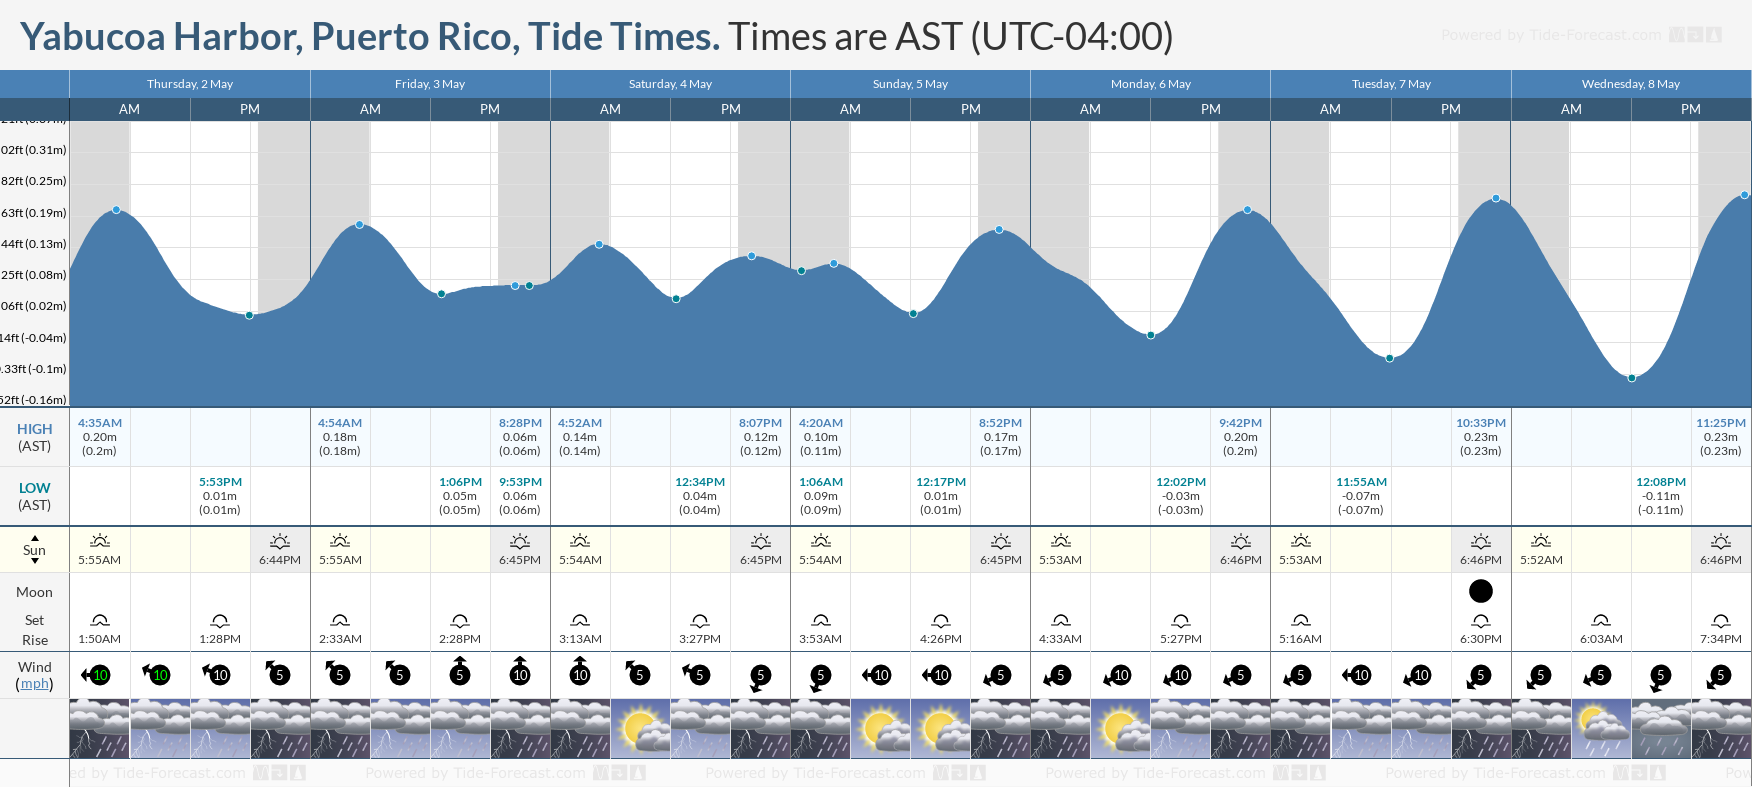 Yabucoa Harbor, Puerto Rico Tide Chart including high and low tide tide times for the next 7 days